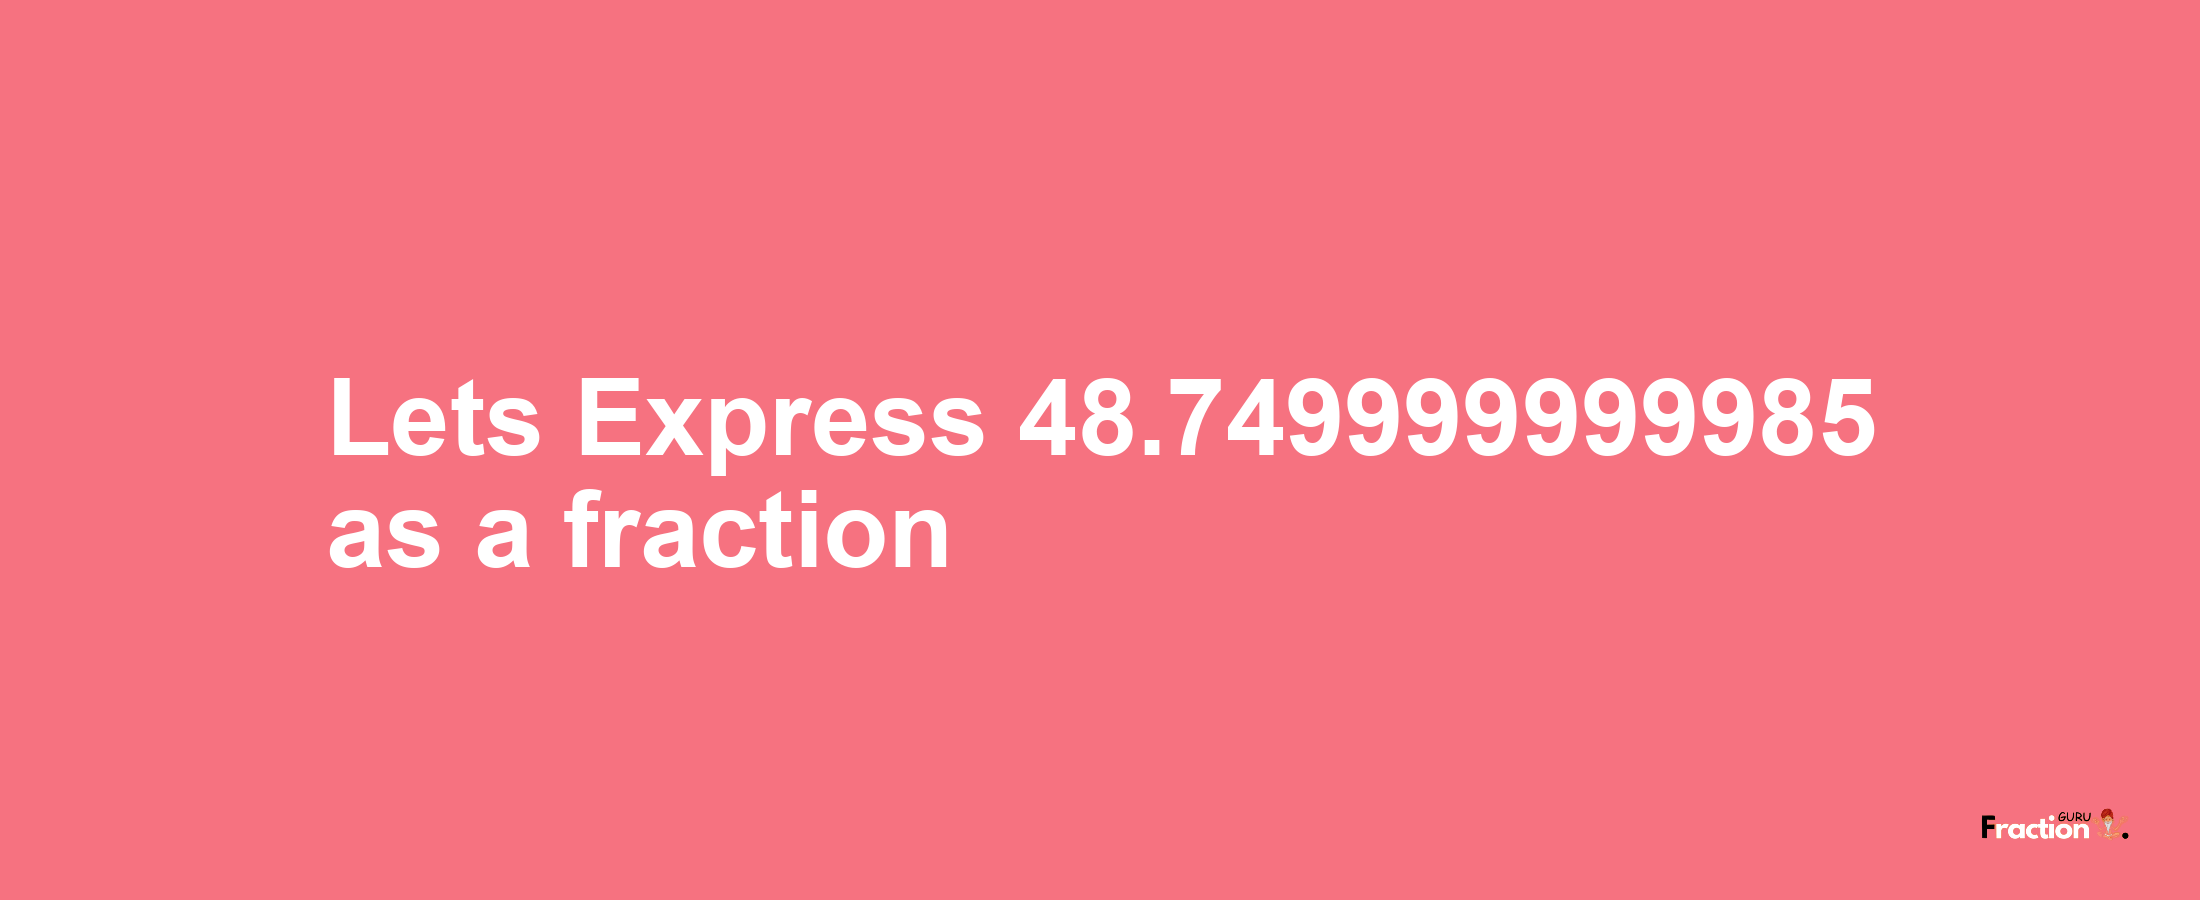 Lets Express 48.749999999985 as afraction